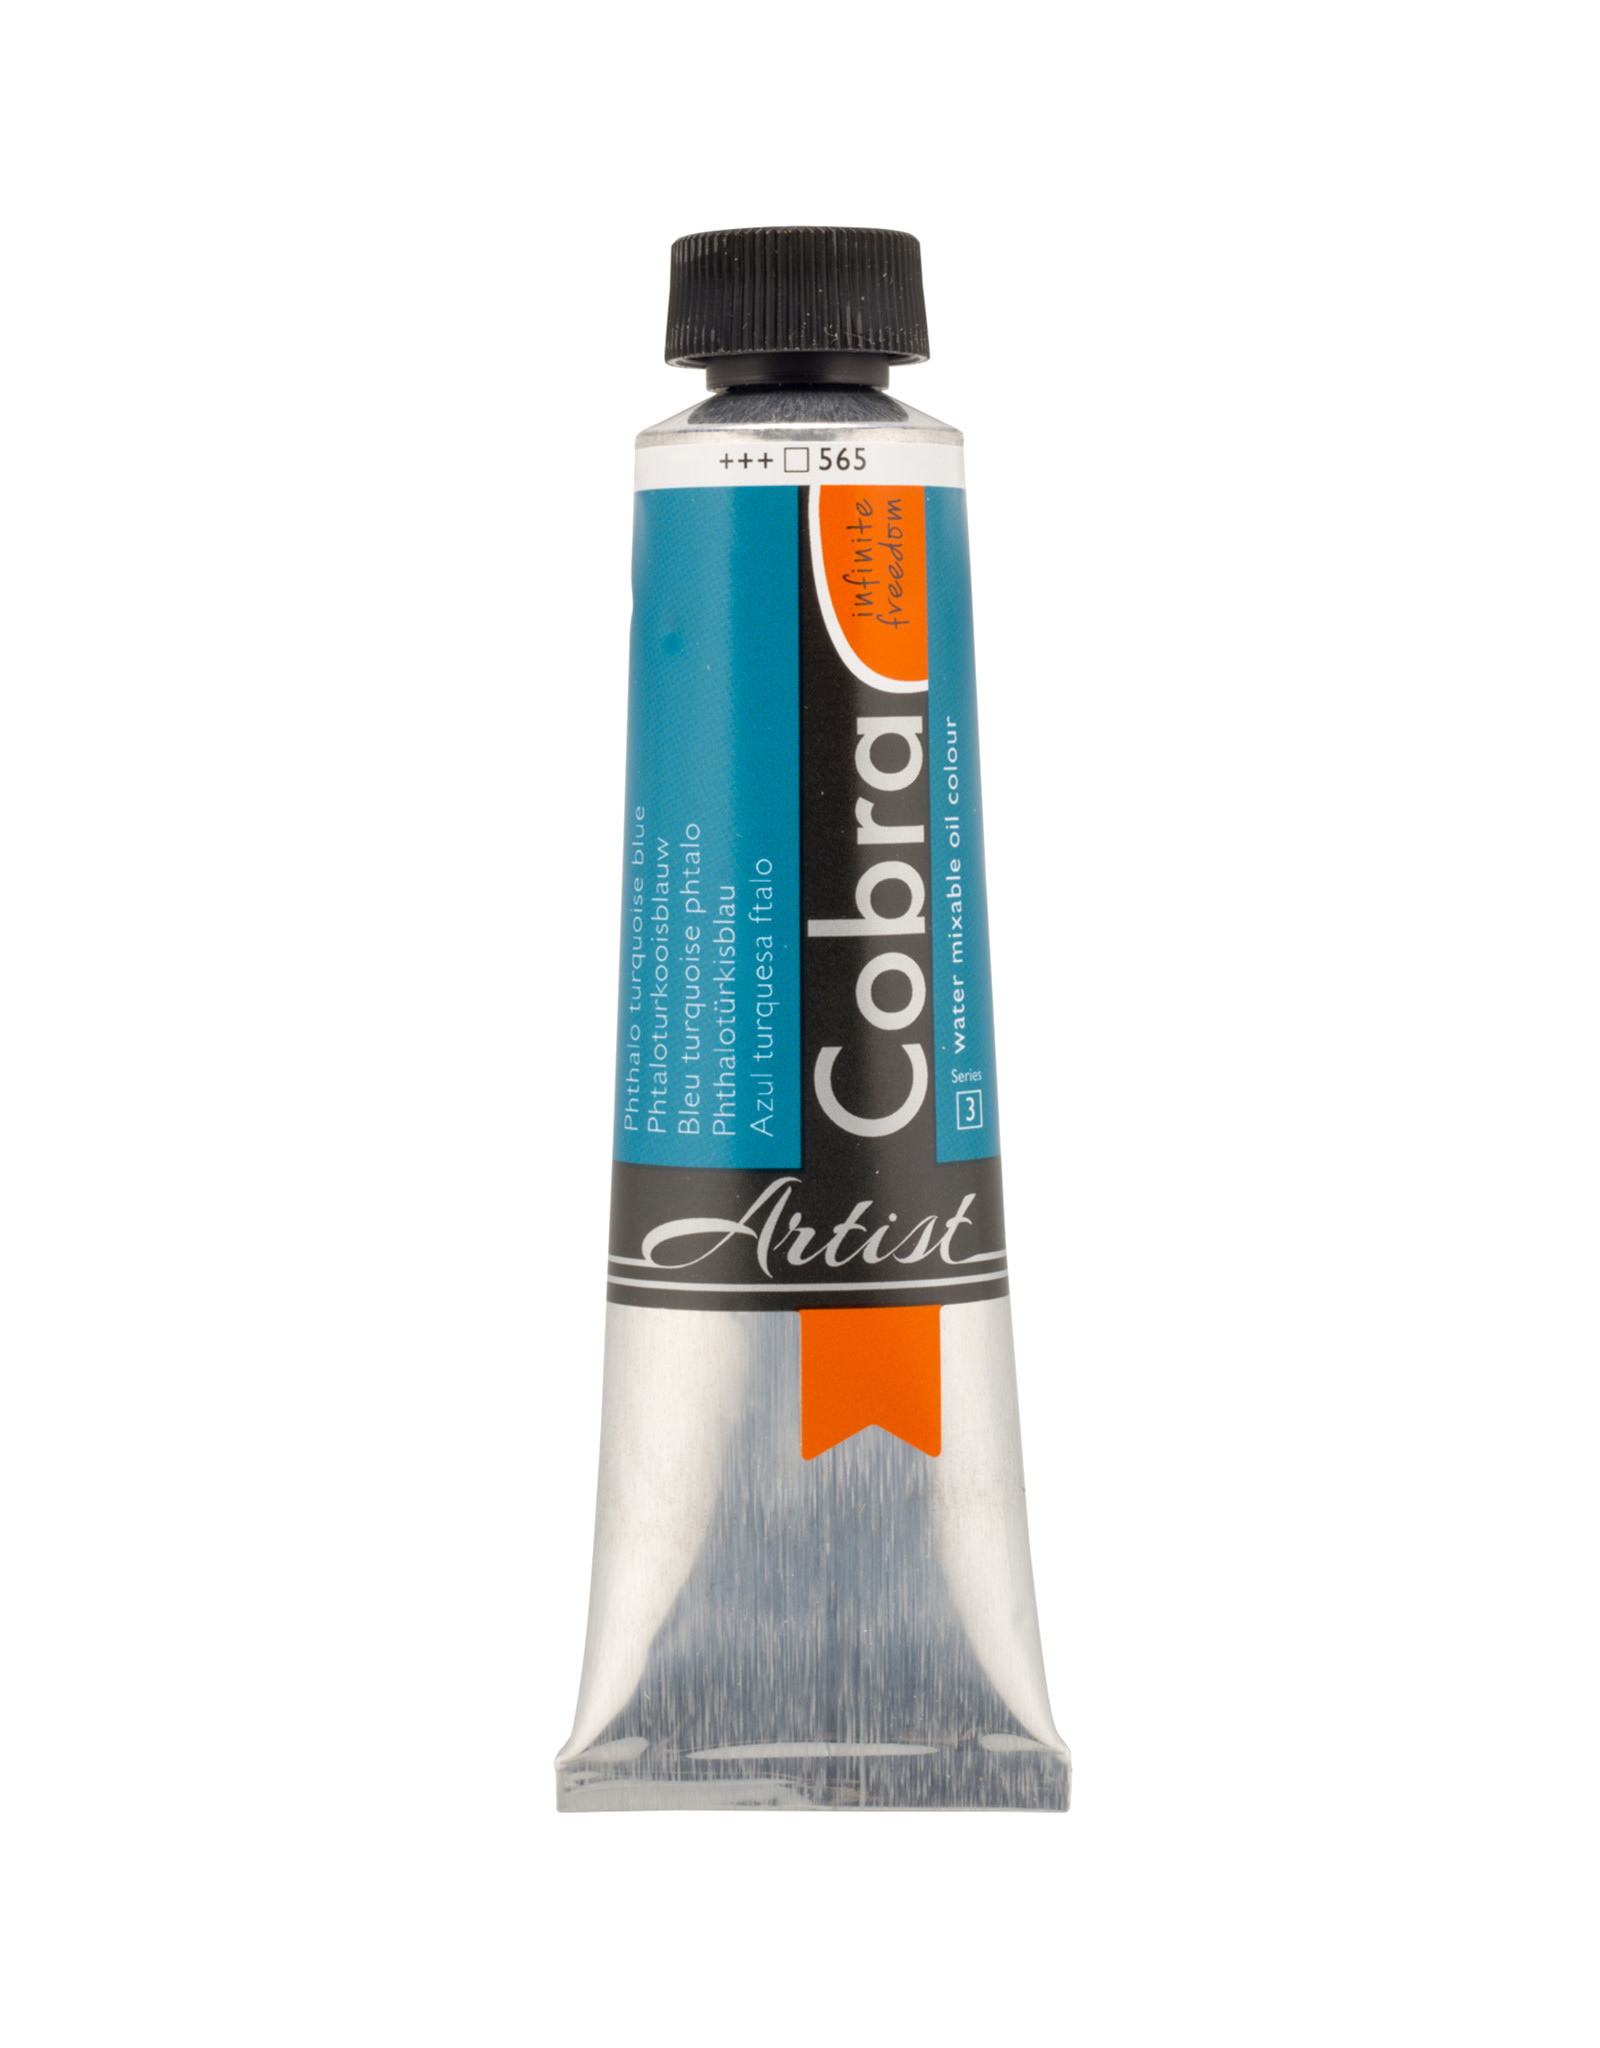 Royal Talens Cobra Water Mixable Artist Oils, Phthalo Turquoise Blue 40ml